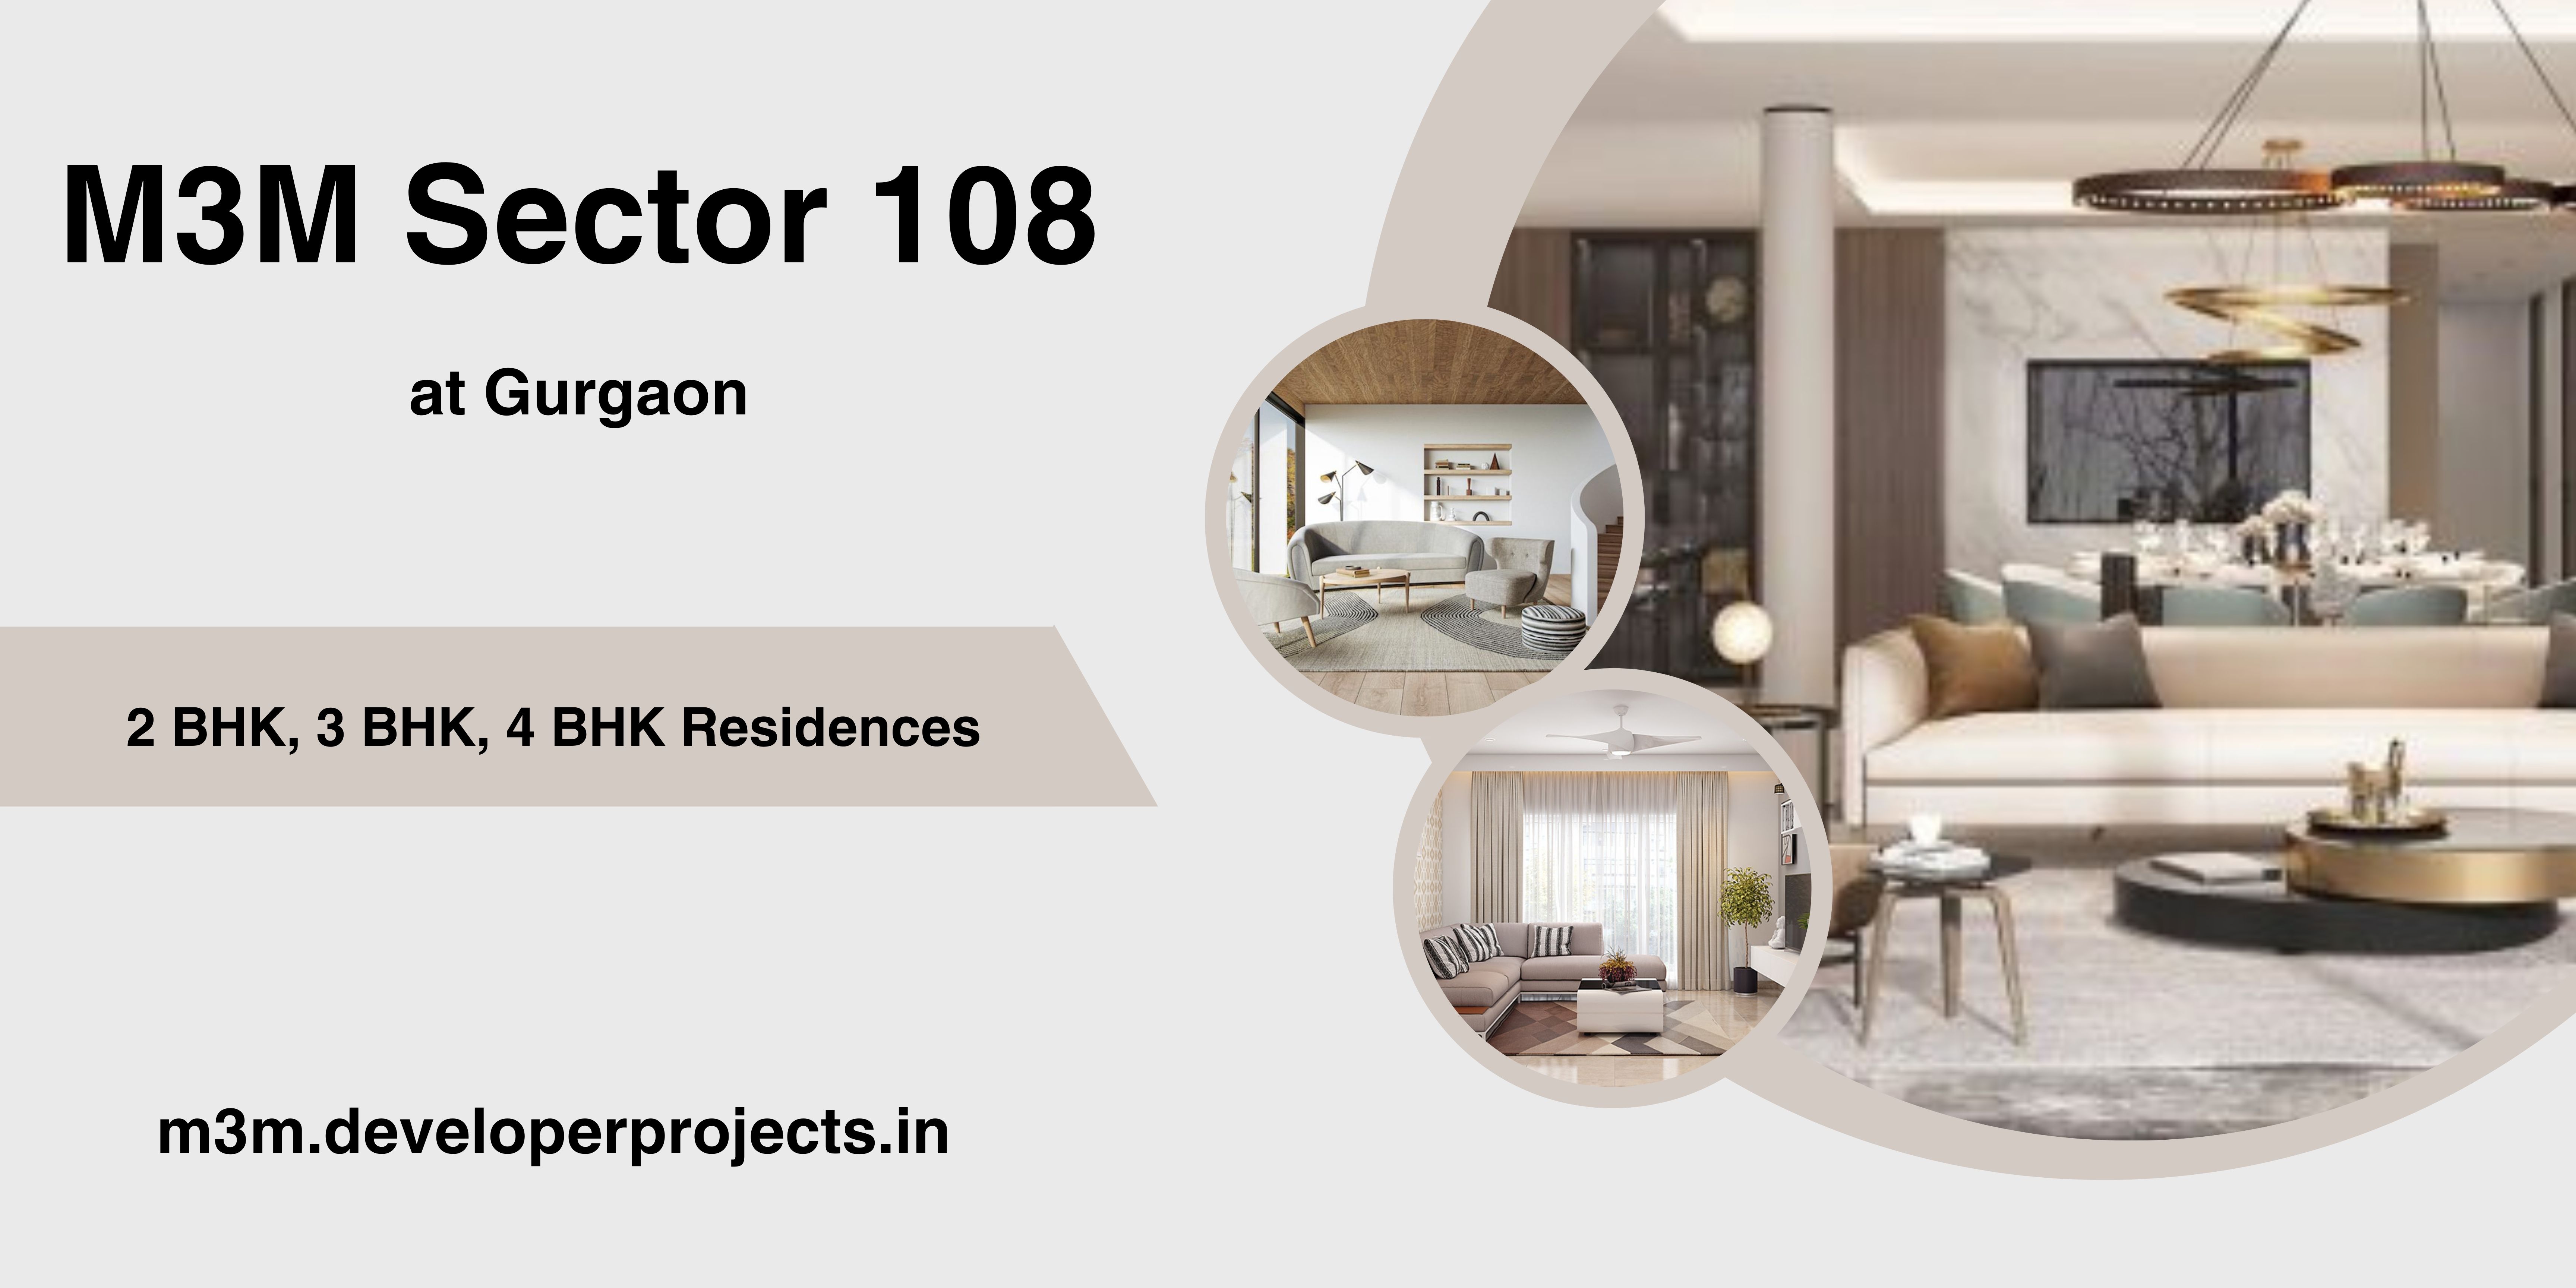 M3M Sector 108 Gurgaon - Because You Deserve A Luxurious Life